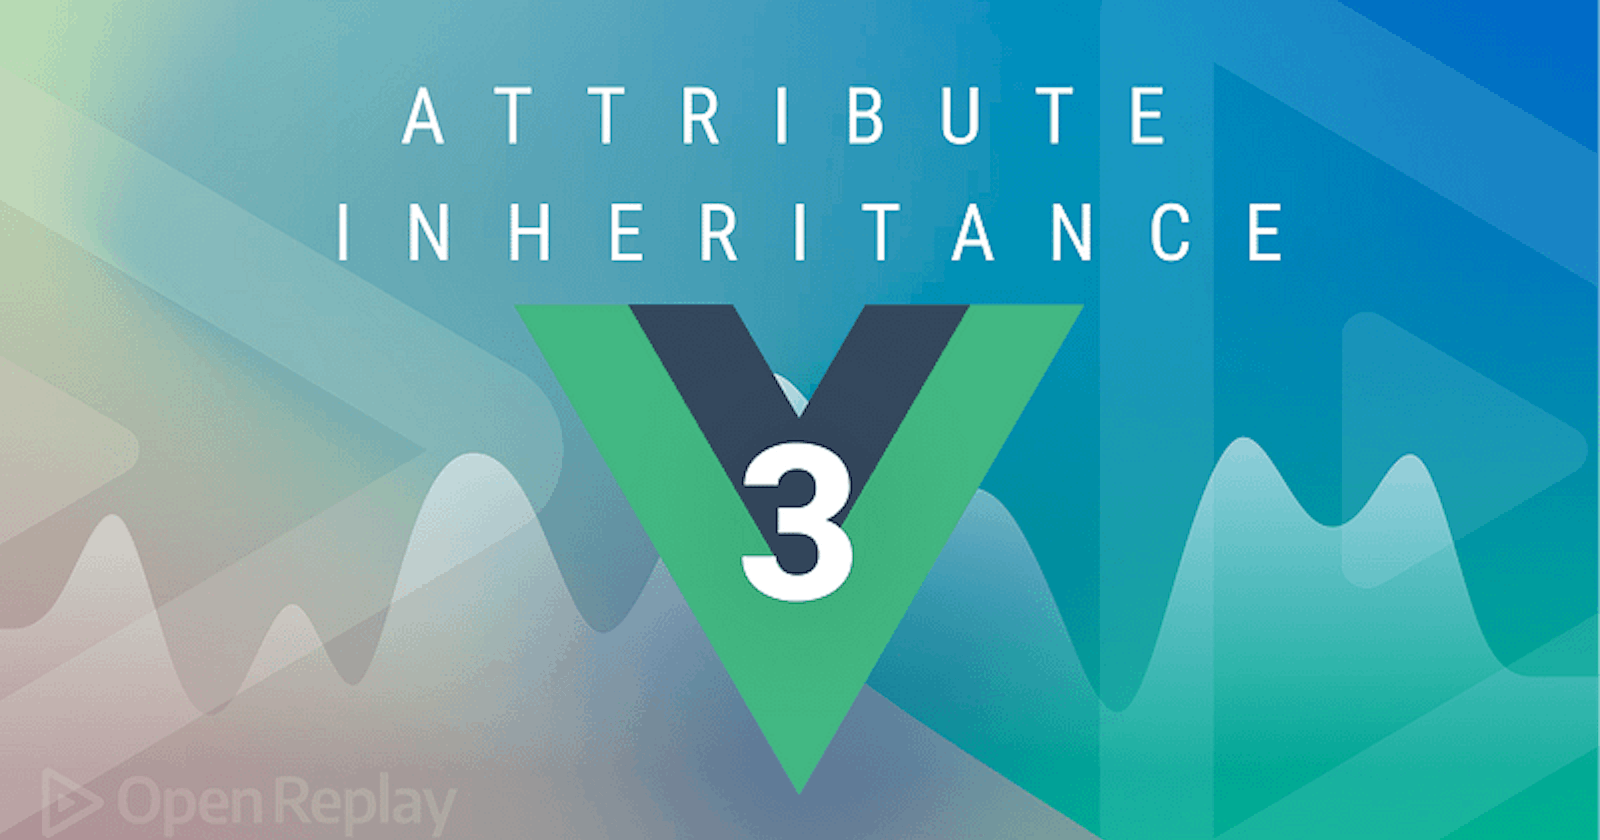 How to Use Attribute Inheritance in Vue 3